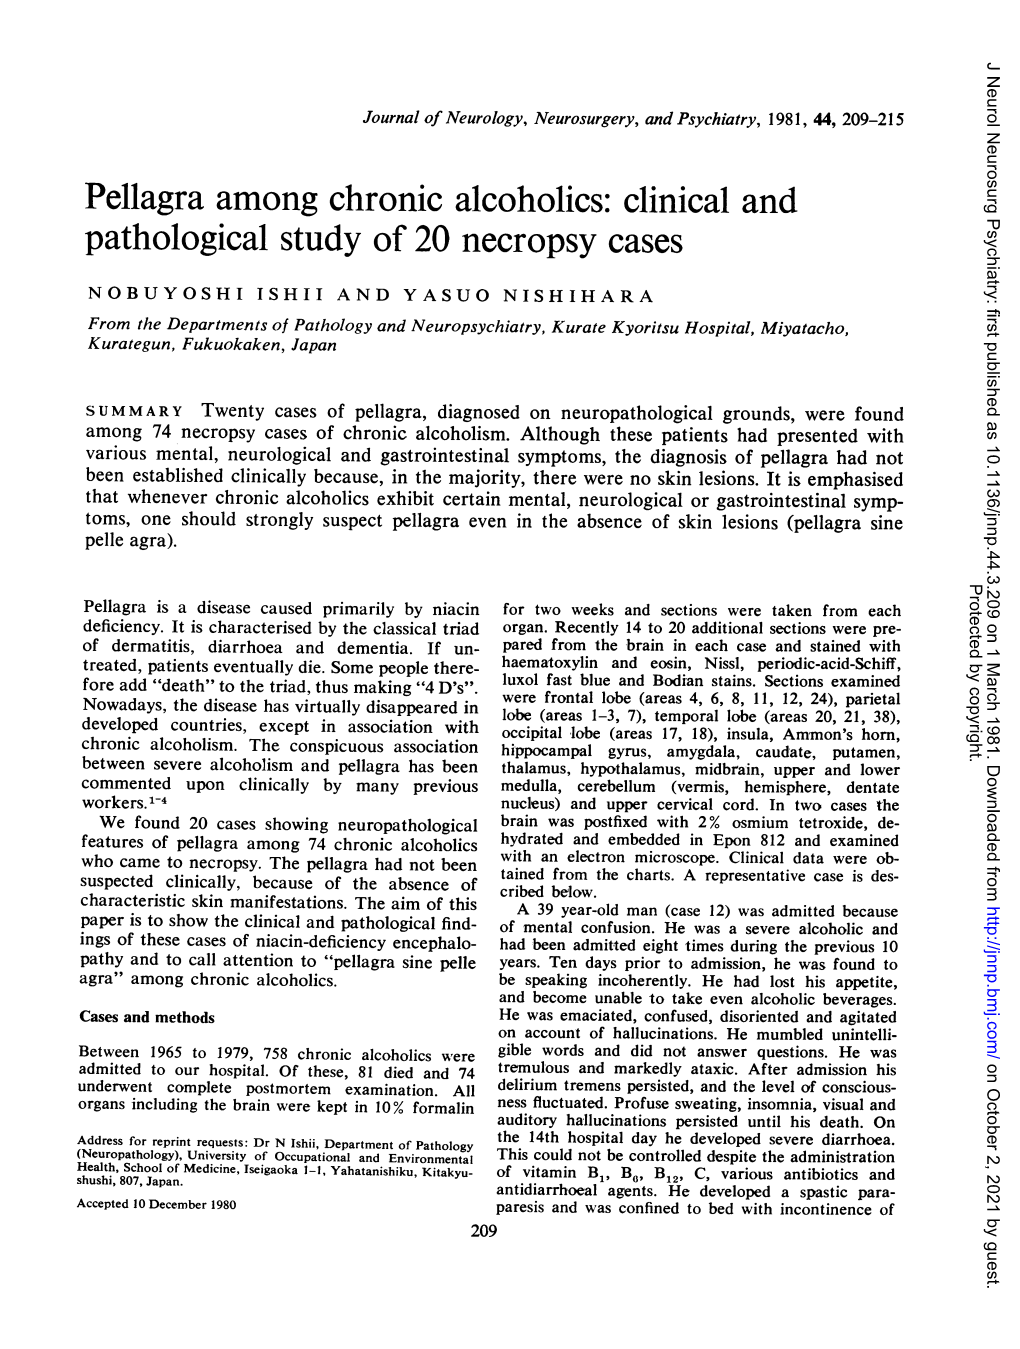 Pellagra Among Chronic Alcoholics: Clinical and Pathological Study of 20 Necropsy Cases